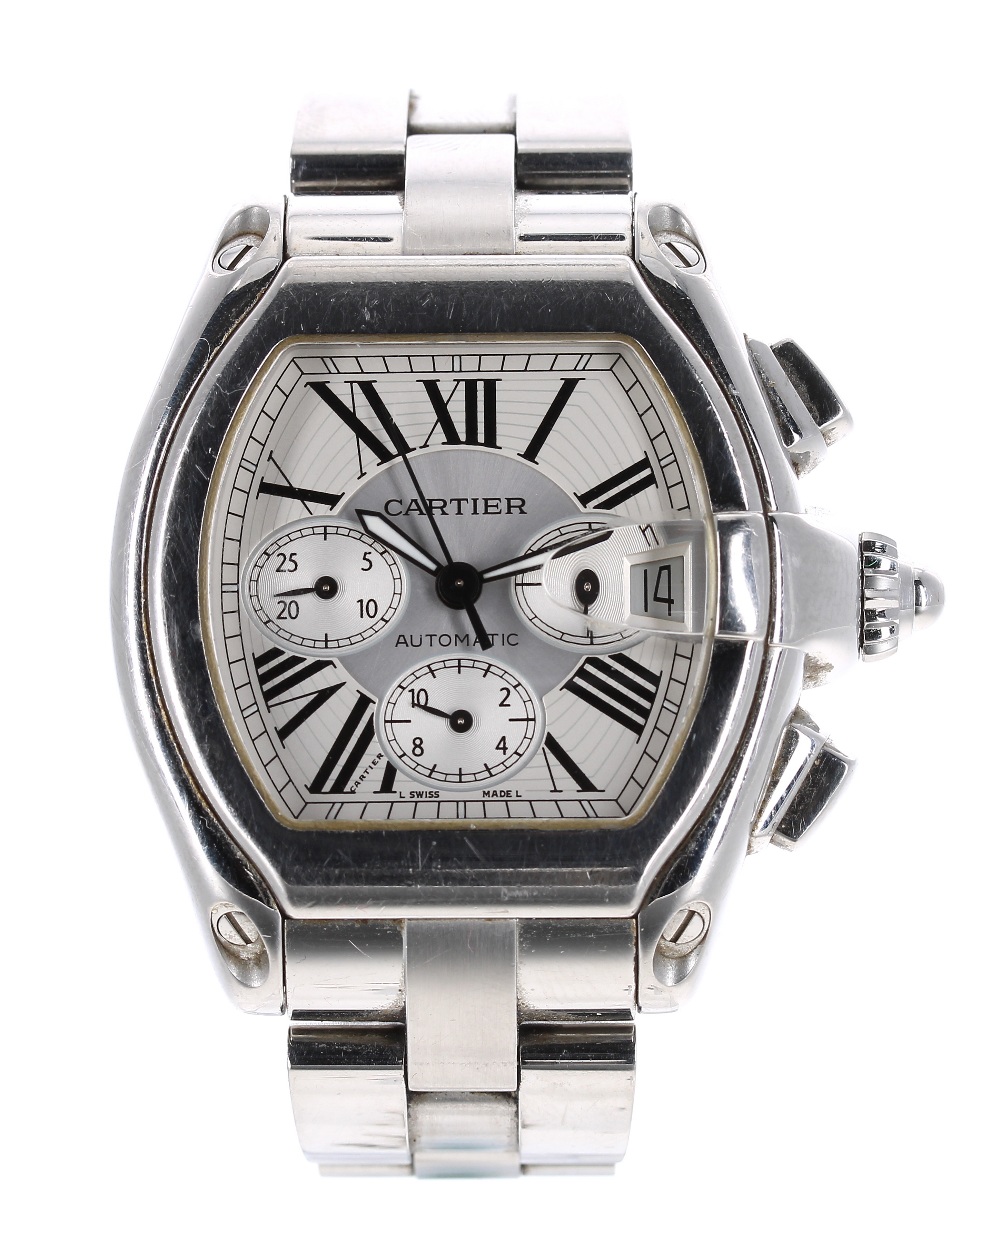 Cartier Roadster Chronograph automatic stainless steel gentleman's bracelet watch, ref. 2618, serial